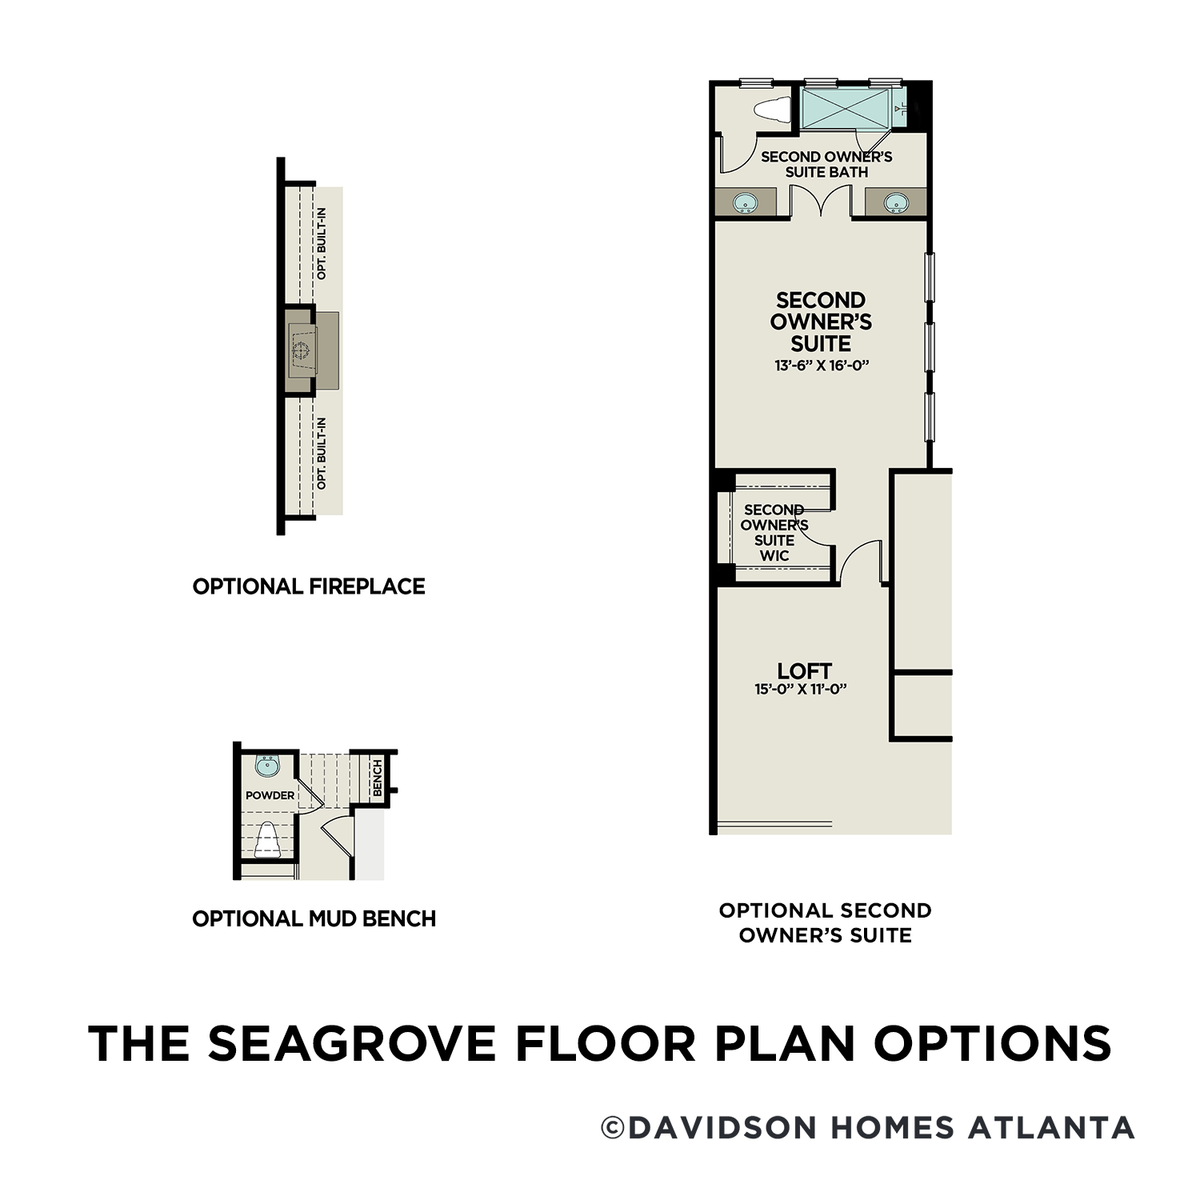 3 - The Seagrove B floor plan layout for 754 Stickley Oak Way in Davidson Homes' The Village at Towne Lake community.